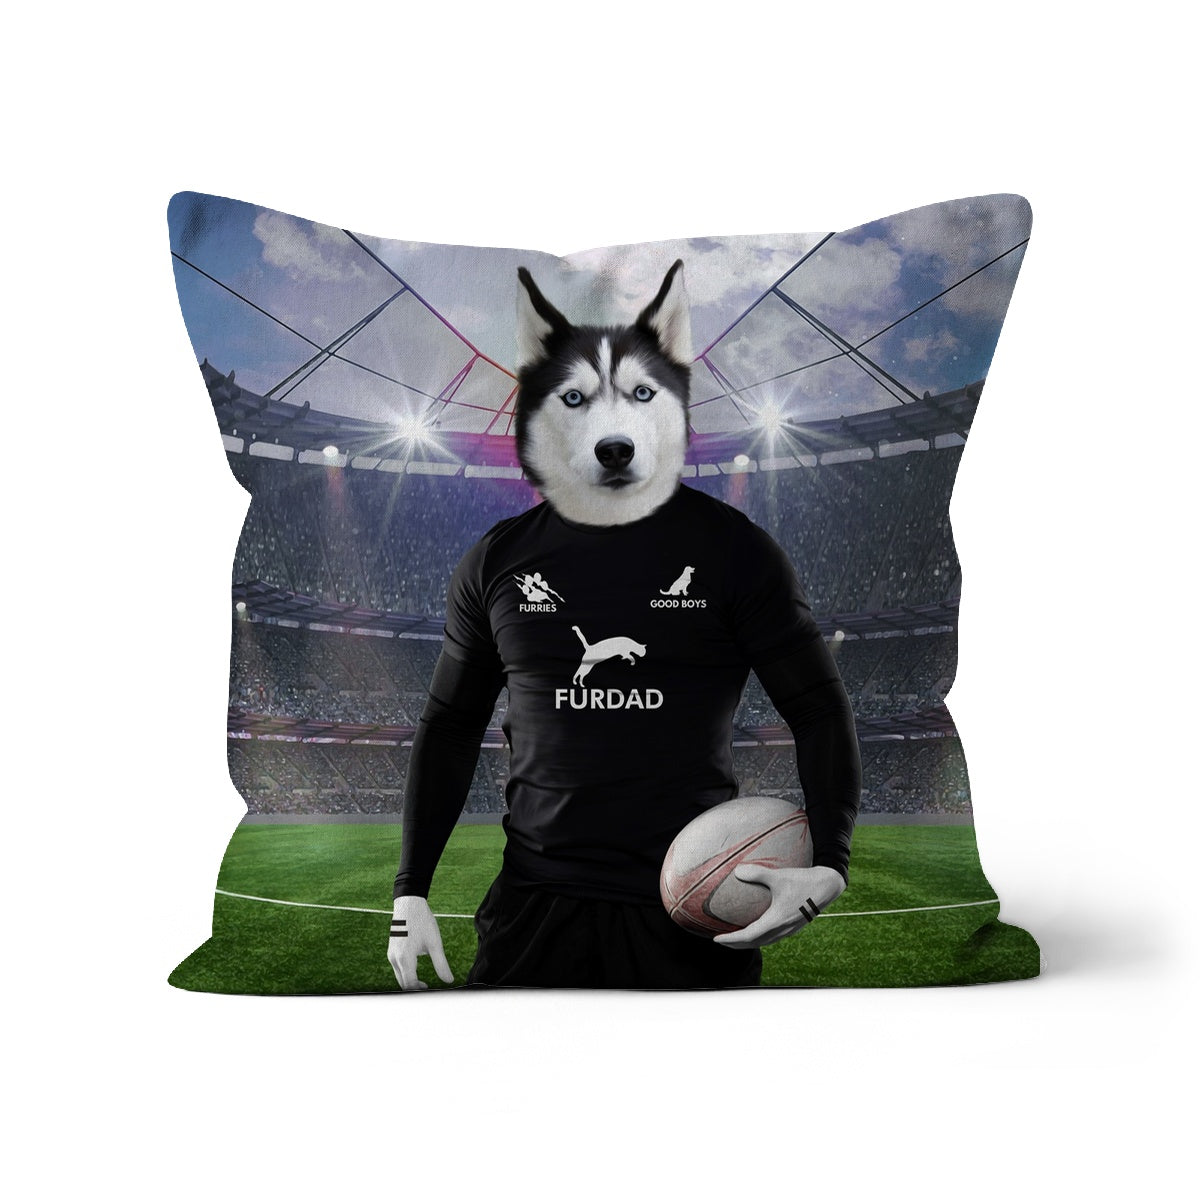 New Zealand Rugby Team: Paw & Glory, paw and glory, pet pillow, pillow custom, Pet Portraits cushion, dog pillow custom, custom pet pillows, create your own pillow, customized throw pillows